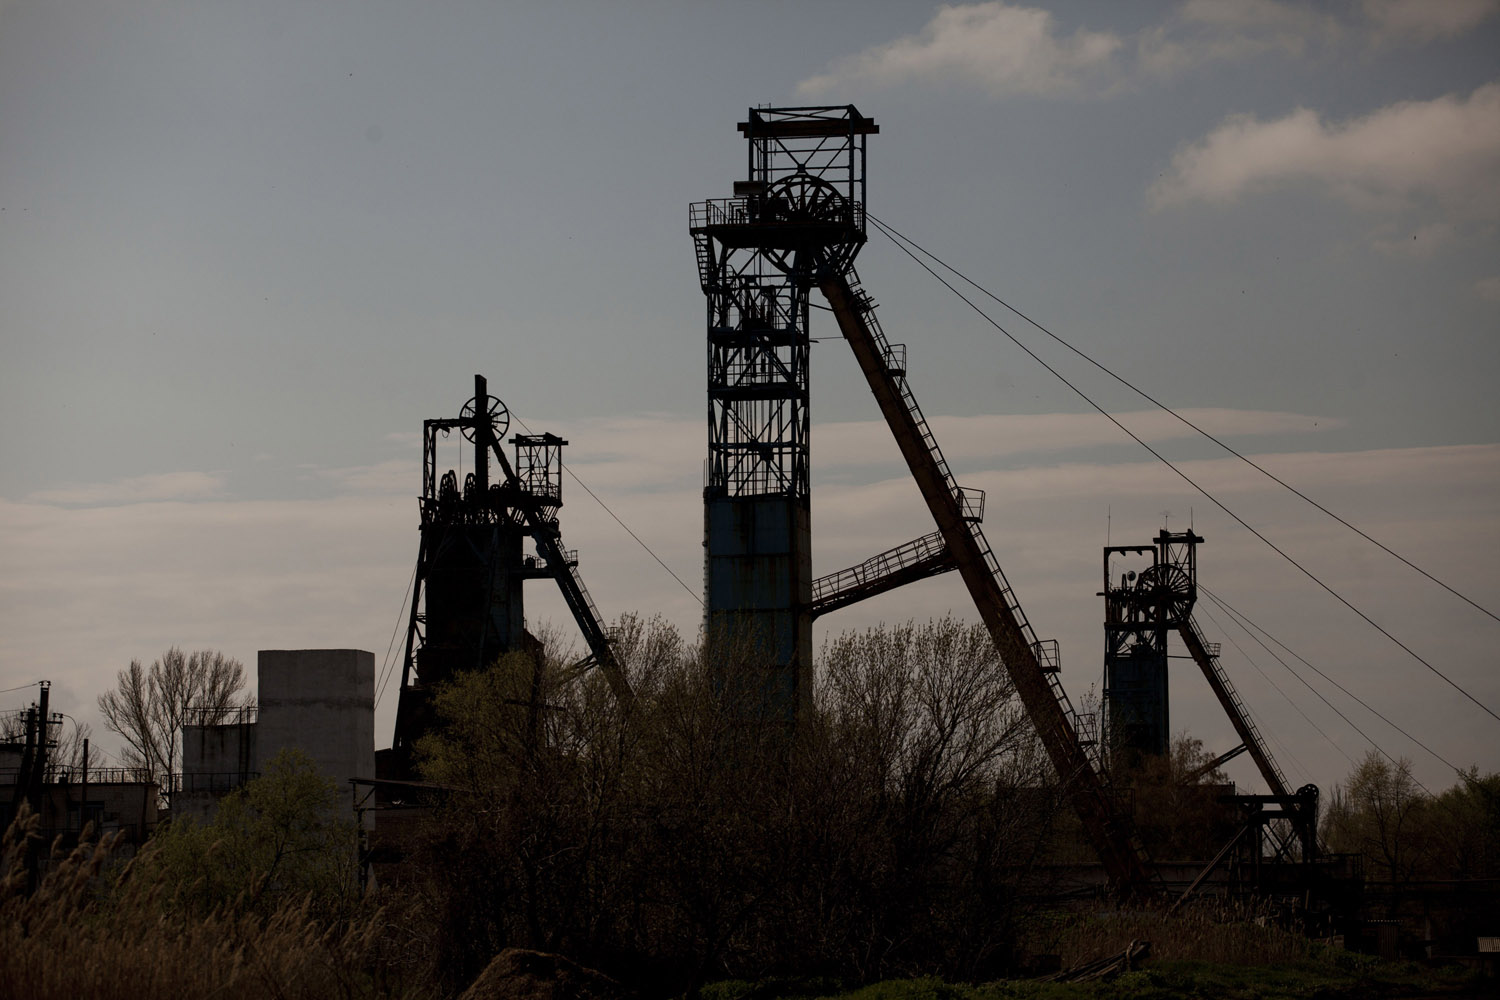 The elevator towers of an old mine in Krasnodon. The mines and the equipment they use date back to the Soviet Union. Soviet technology, people say in the Donbass, might not work very well but will work forever.